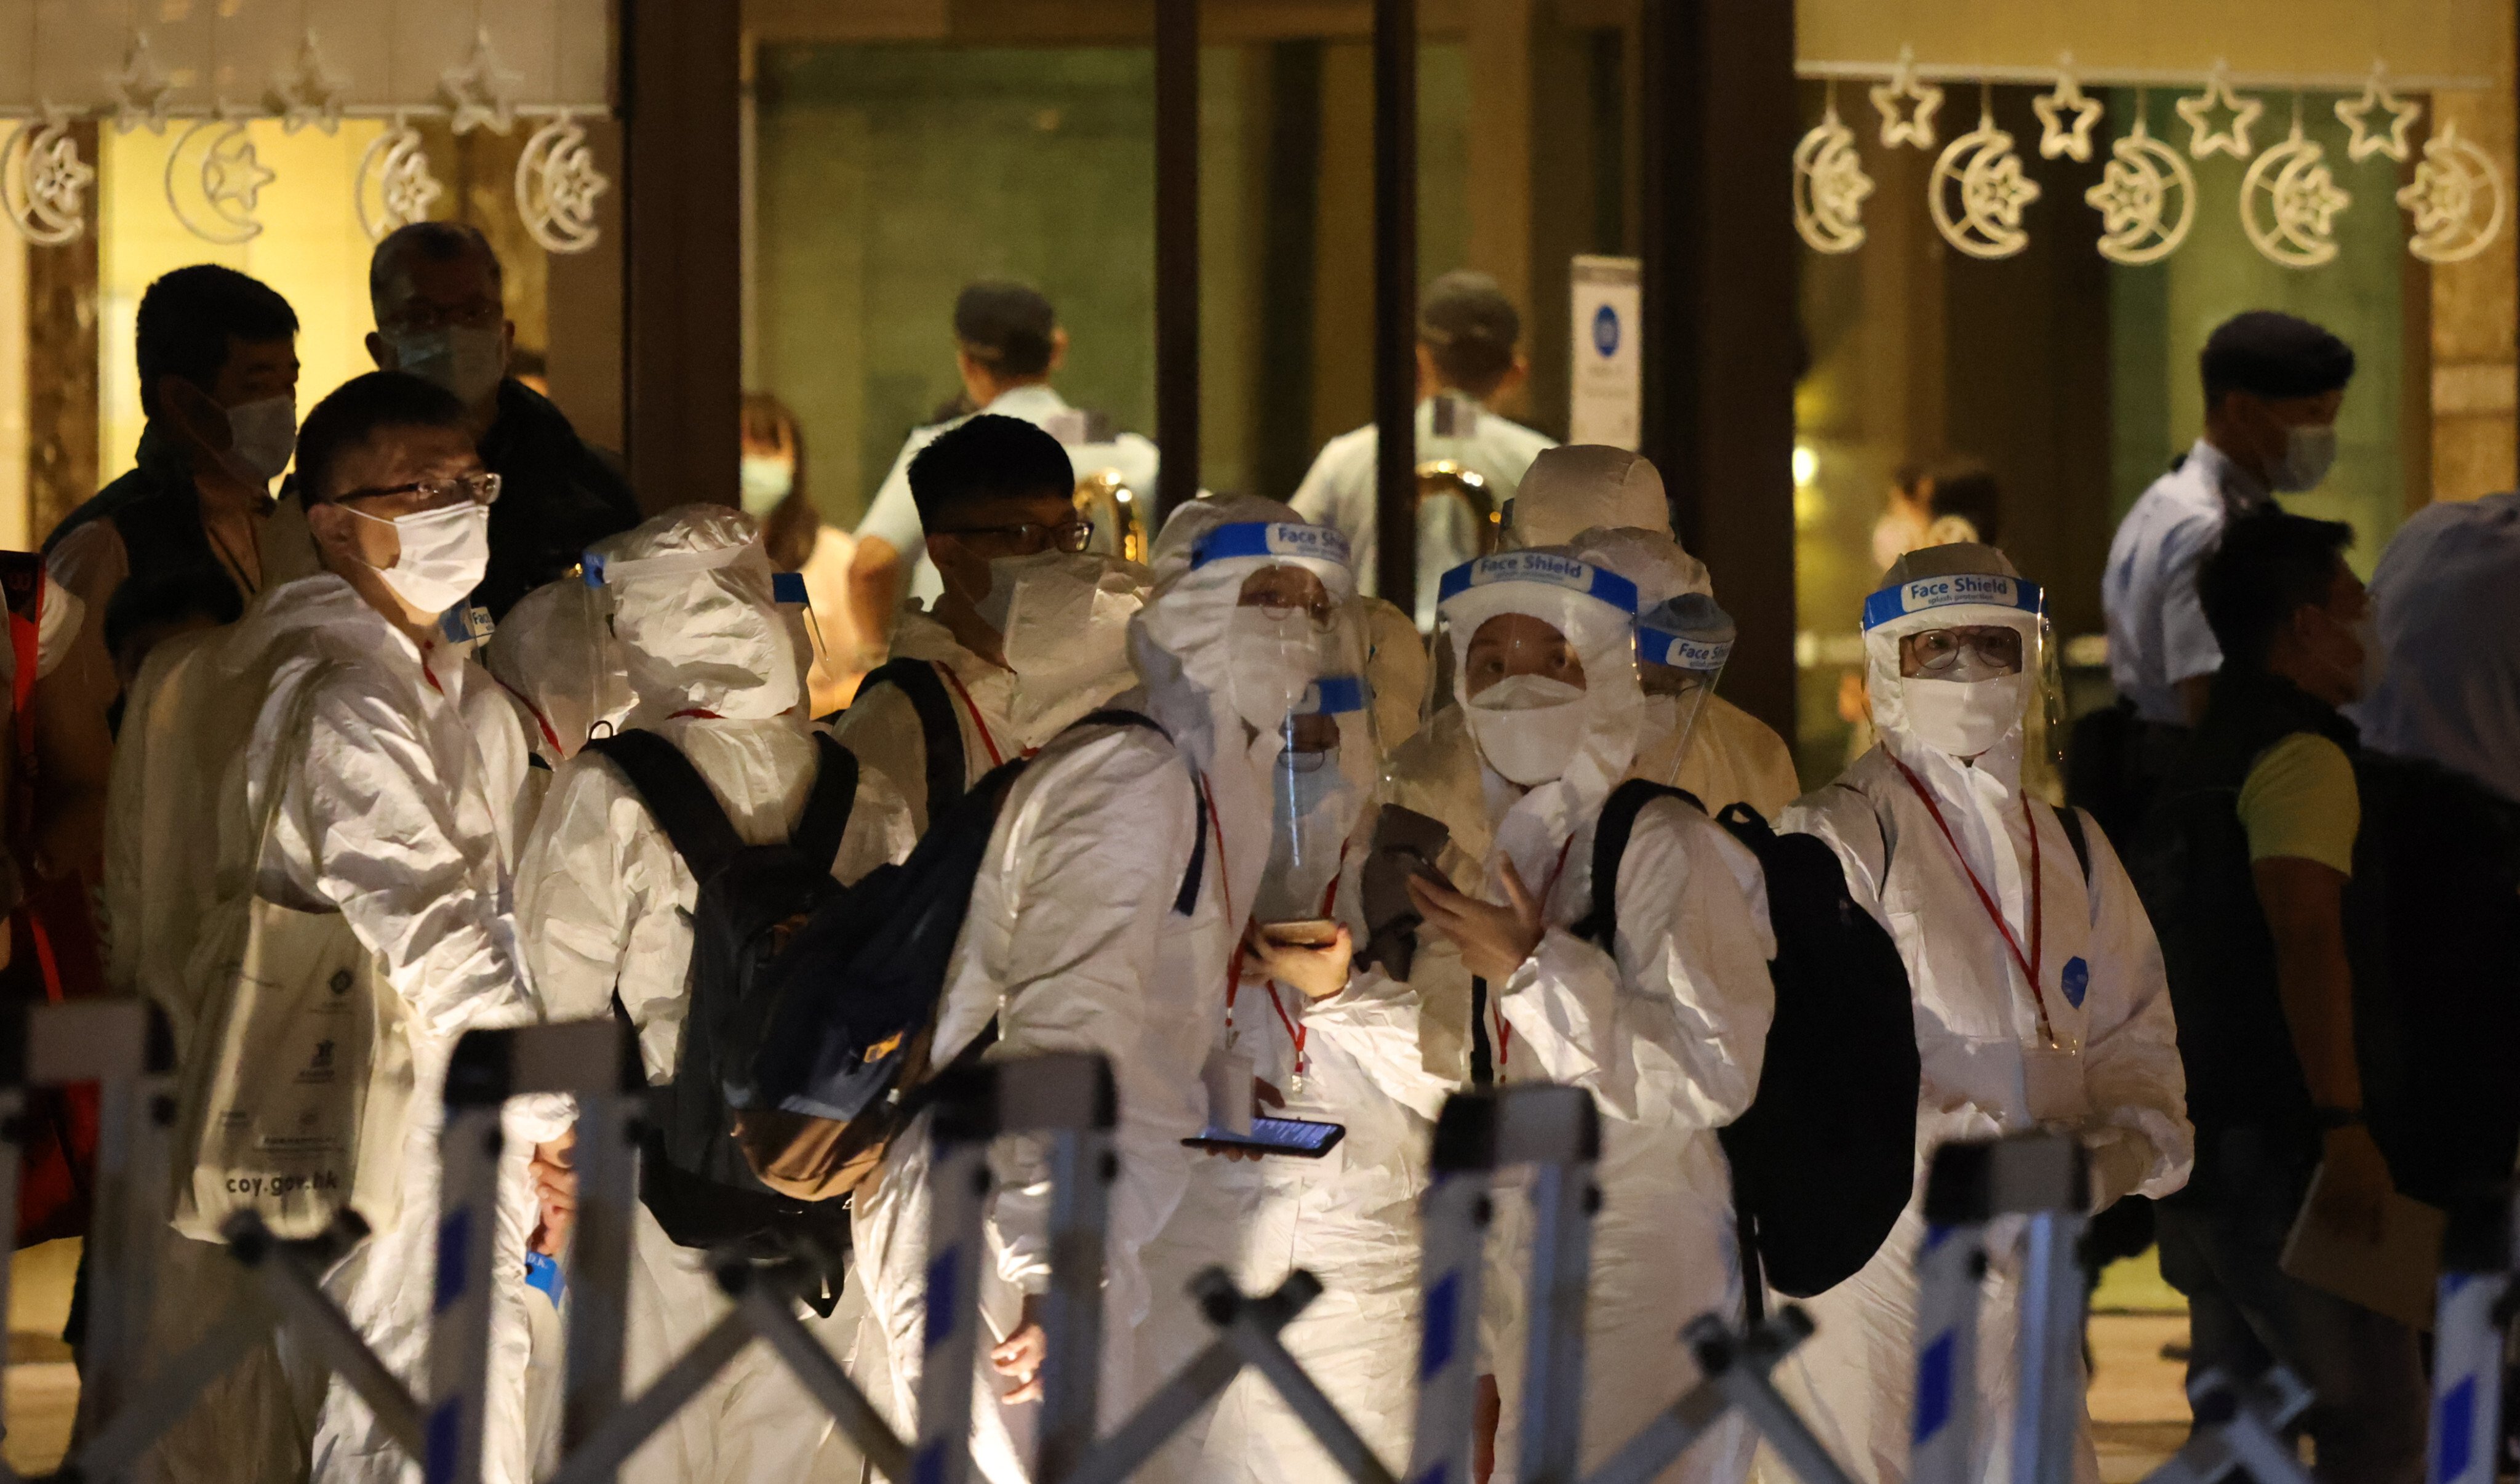 Police and health workers wearing personal protective equipment are seen at a residential tower in Hong Kong under coronavirus lockdown last summer. Photo: K. Y. Cheng